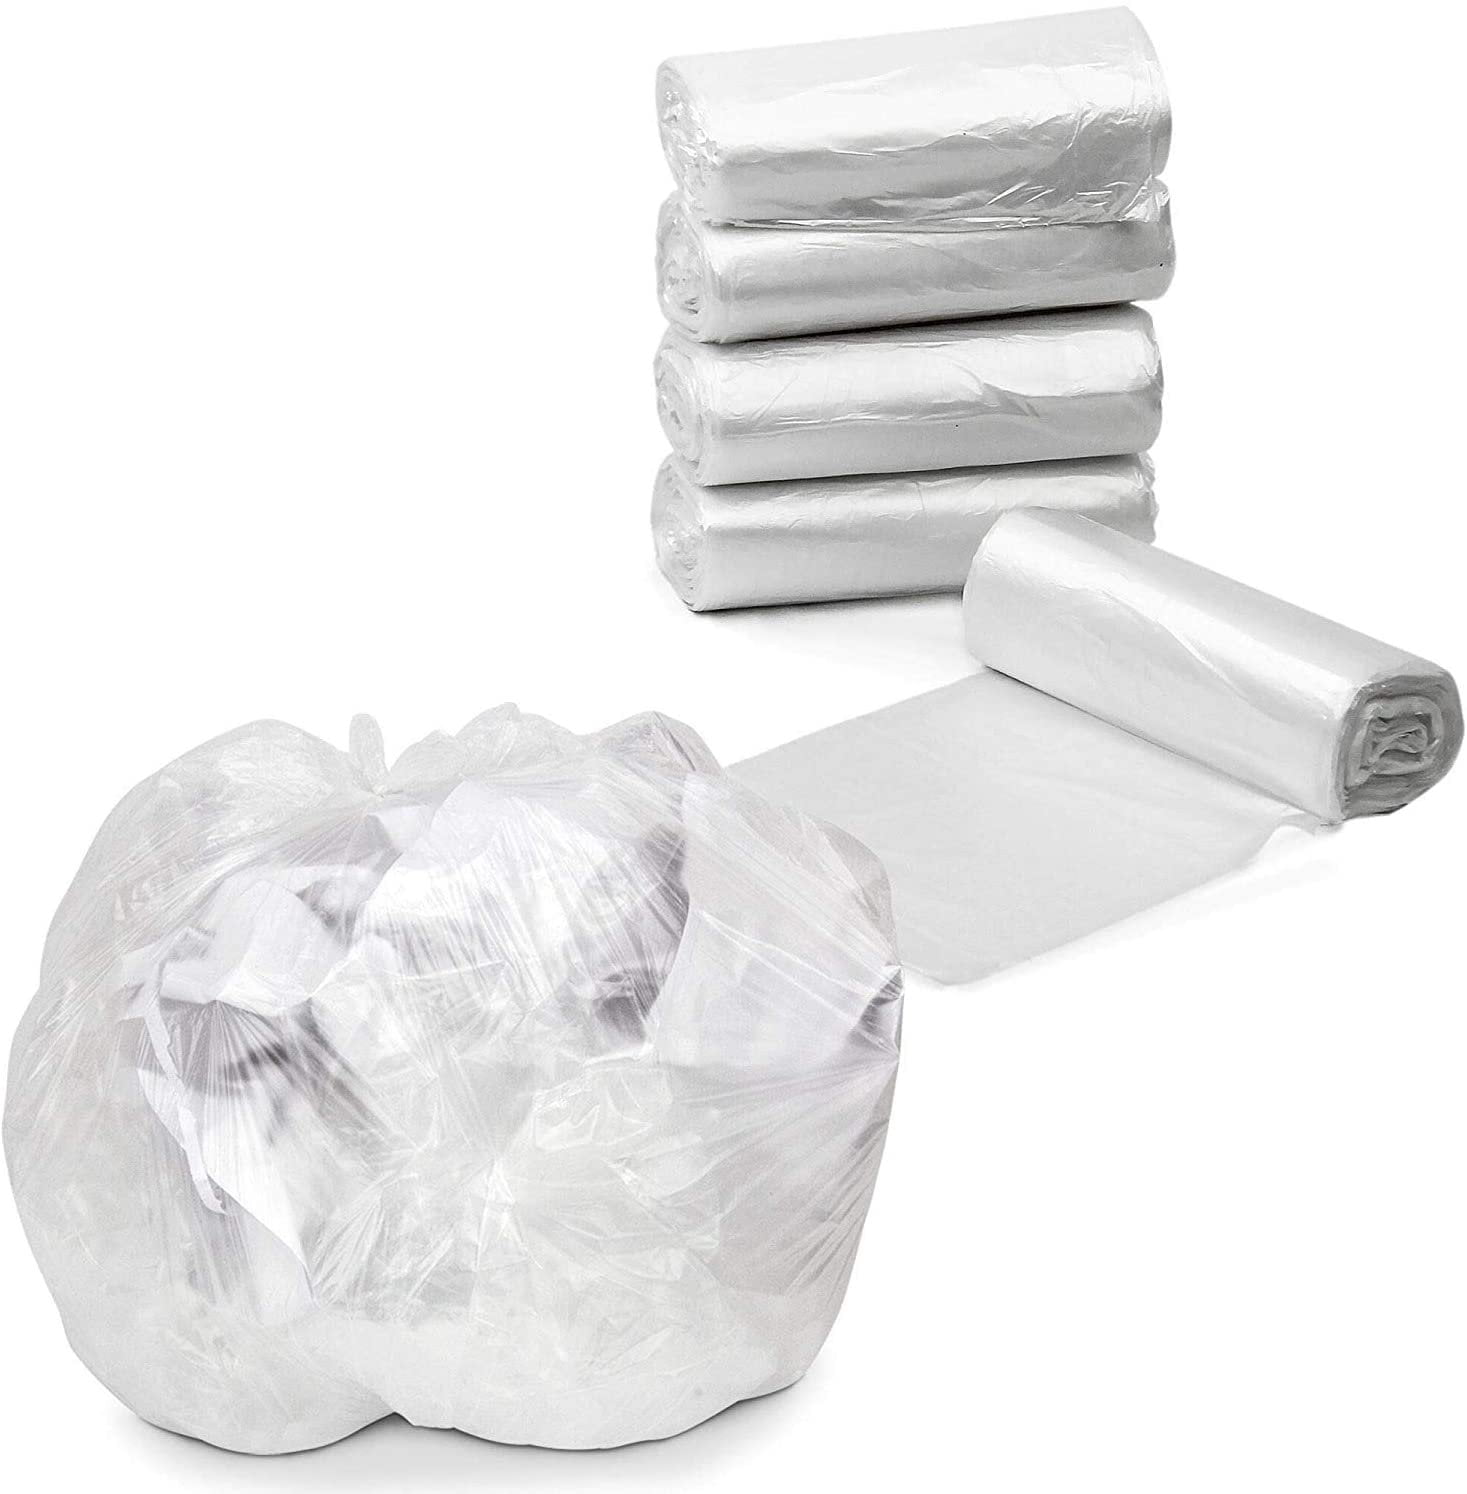 Dropship Pack Of 25 Garbage Can Liners 40 X 48 Ultra Thin Natural Trash Bags  40x48 Thickness 0.43 Mil 40 - 45 Gallon Garbage Bin Liners For Office  Bedroom Kitchen Cans; Wholesale